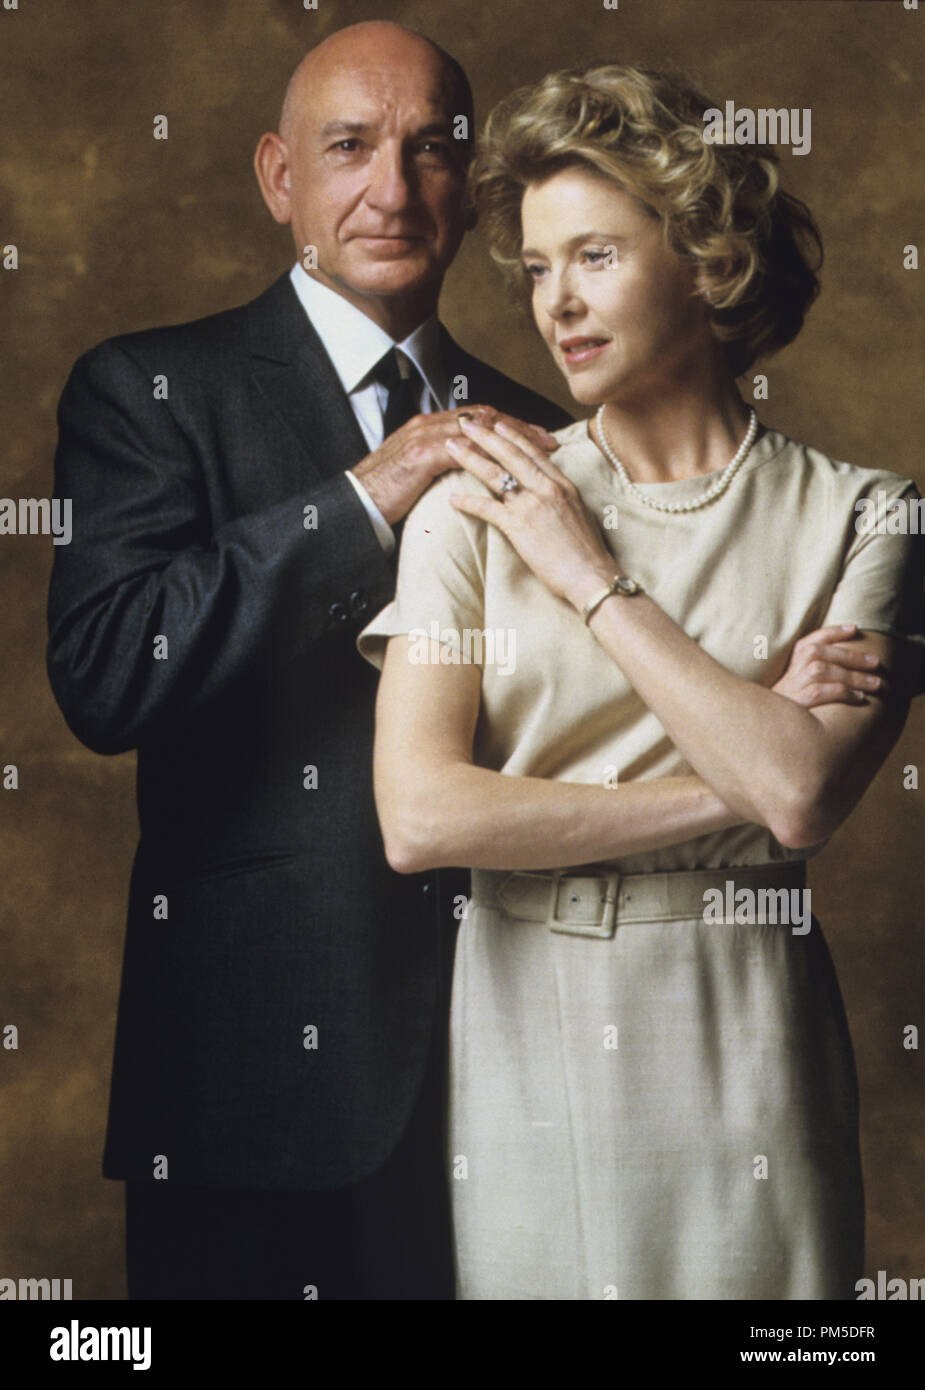 Film Still / Publicity Still from 'Mrs. Harris' Ben Kingsley, Annette Bening 2005 Photo Credit: Albert Watson   File Reference # 30736390THA  For Editorial Use Only -  All Rights Reserved Stock Photo